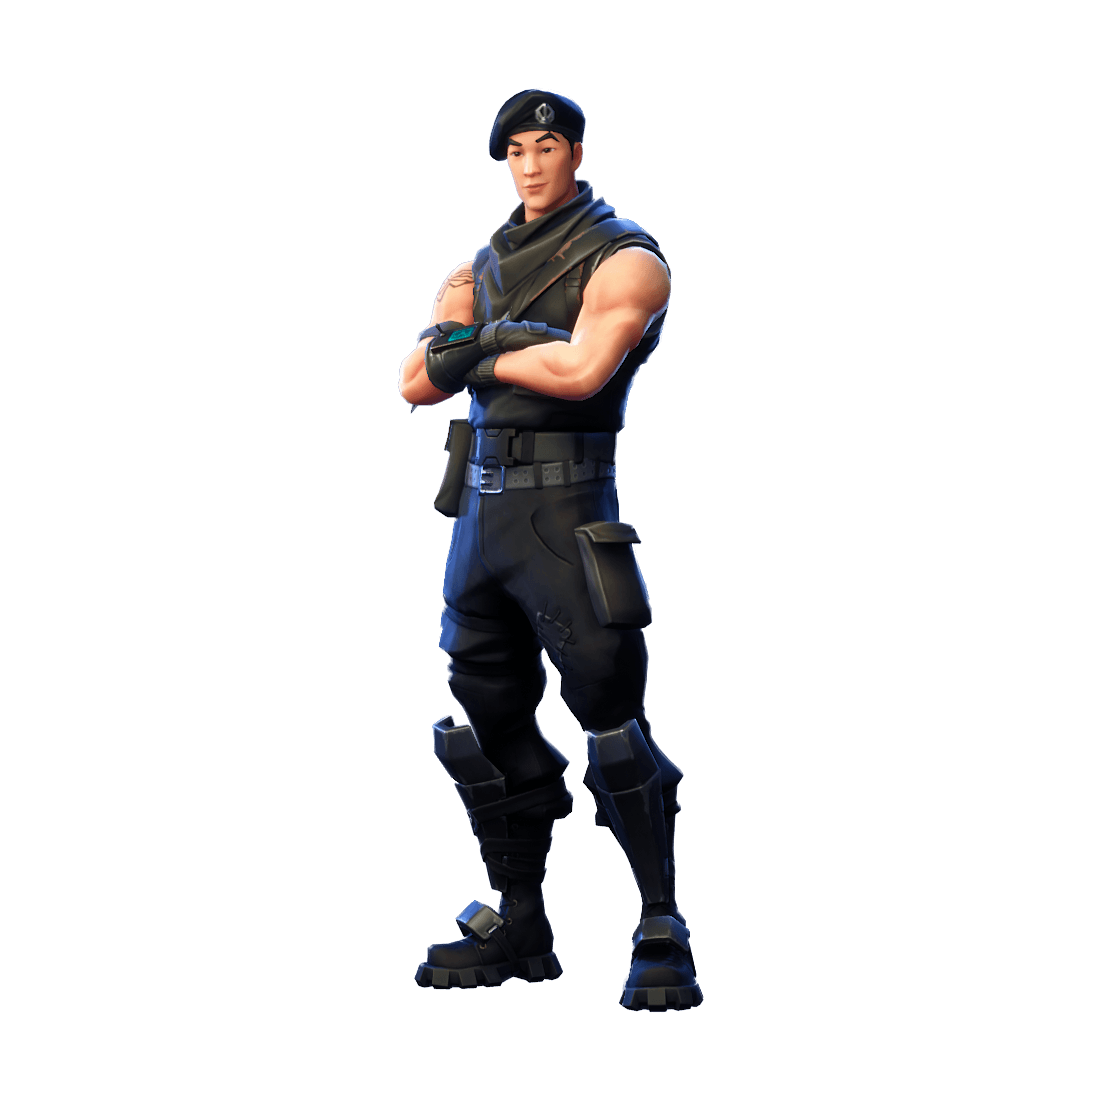 Special Forces Fortnite Outfit Skin How to Get + Info